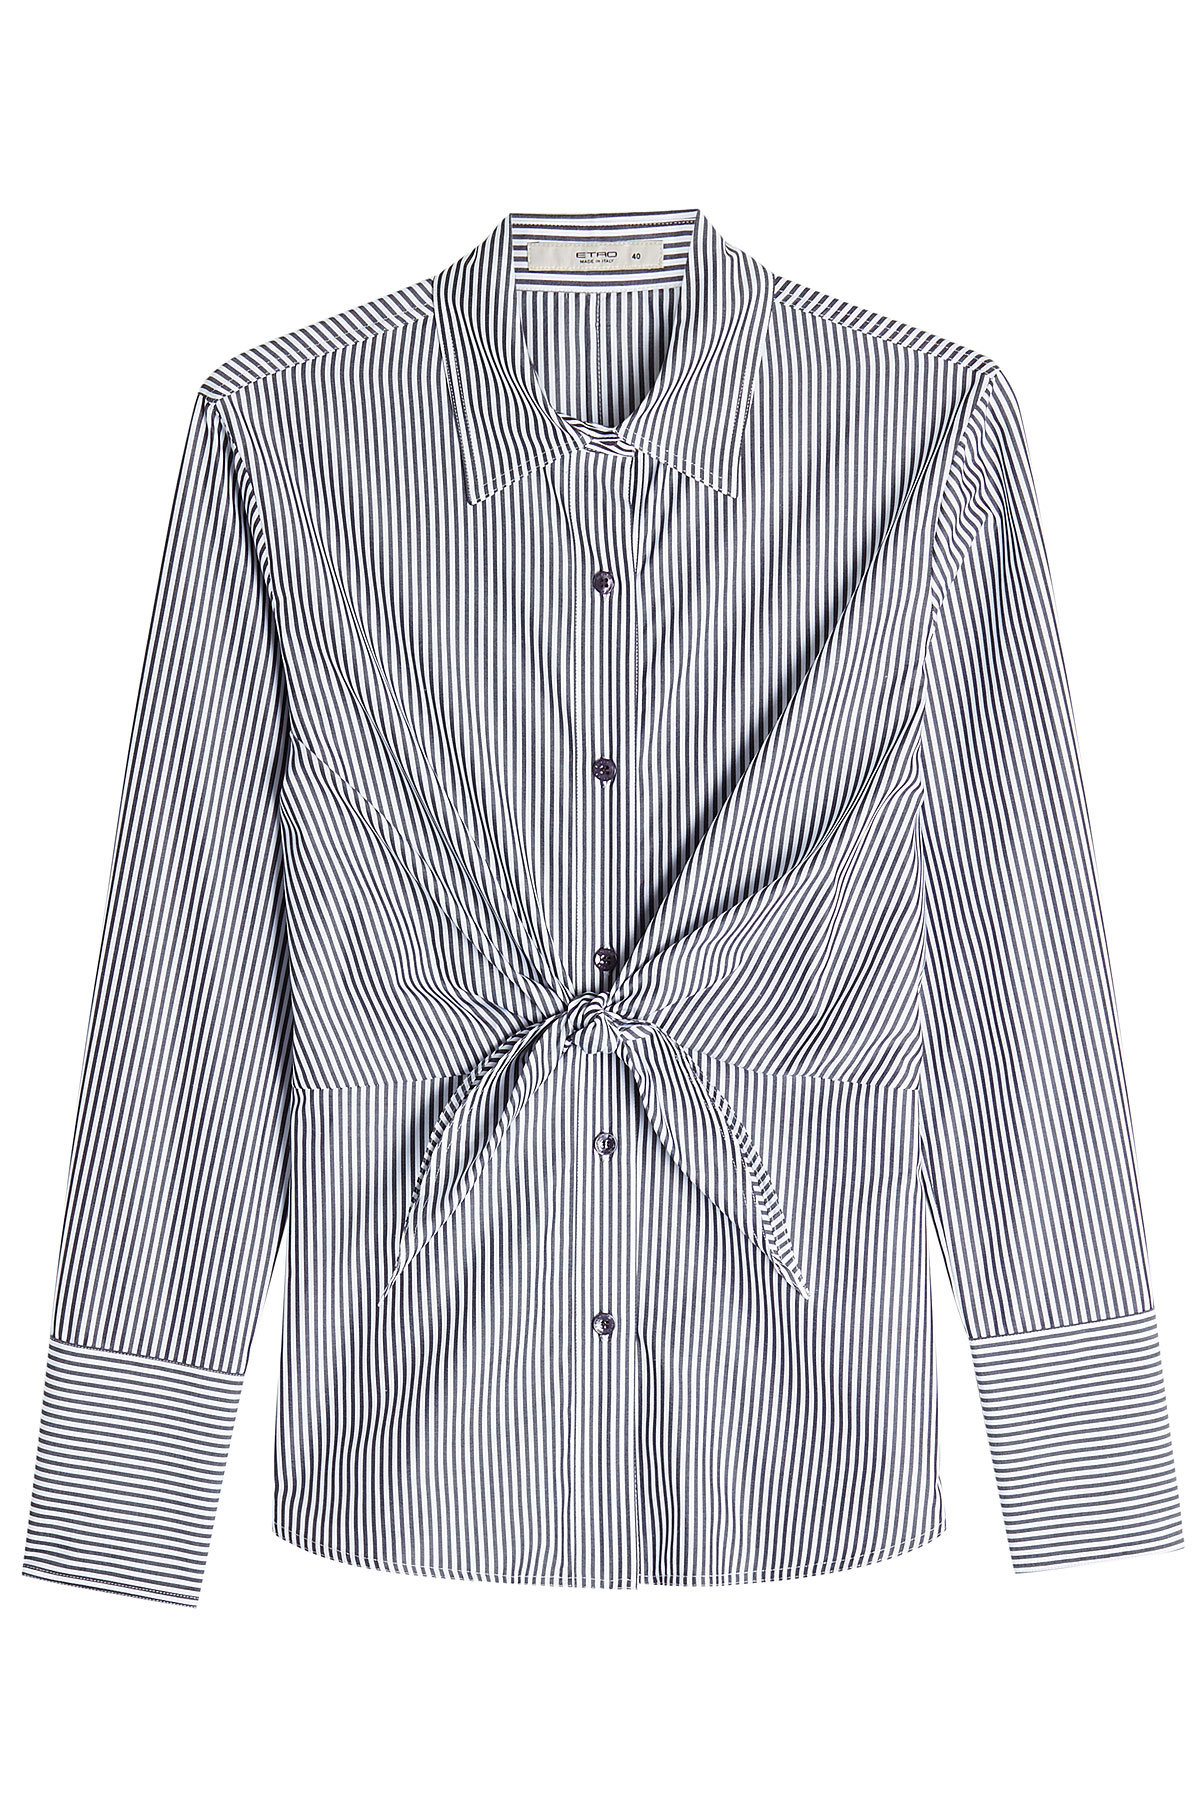 Etro - Striped Cotton Shirt with Knotted Front